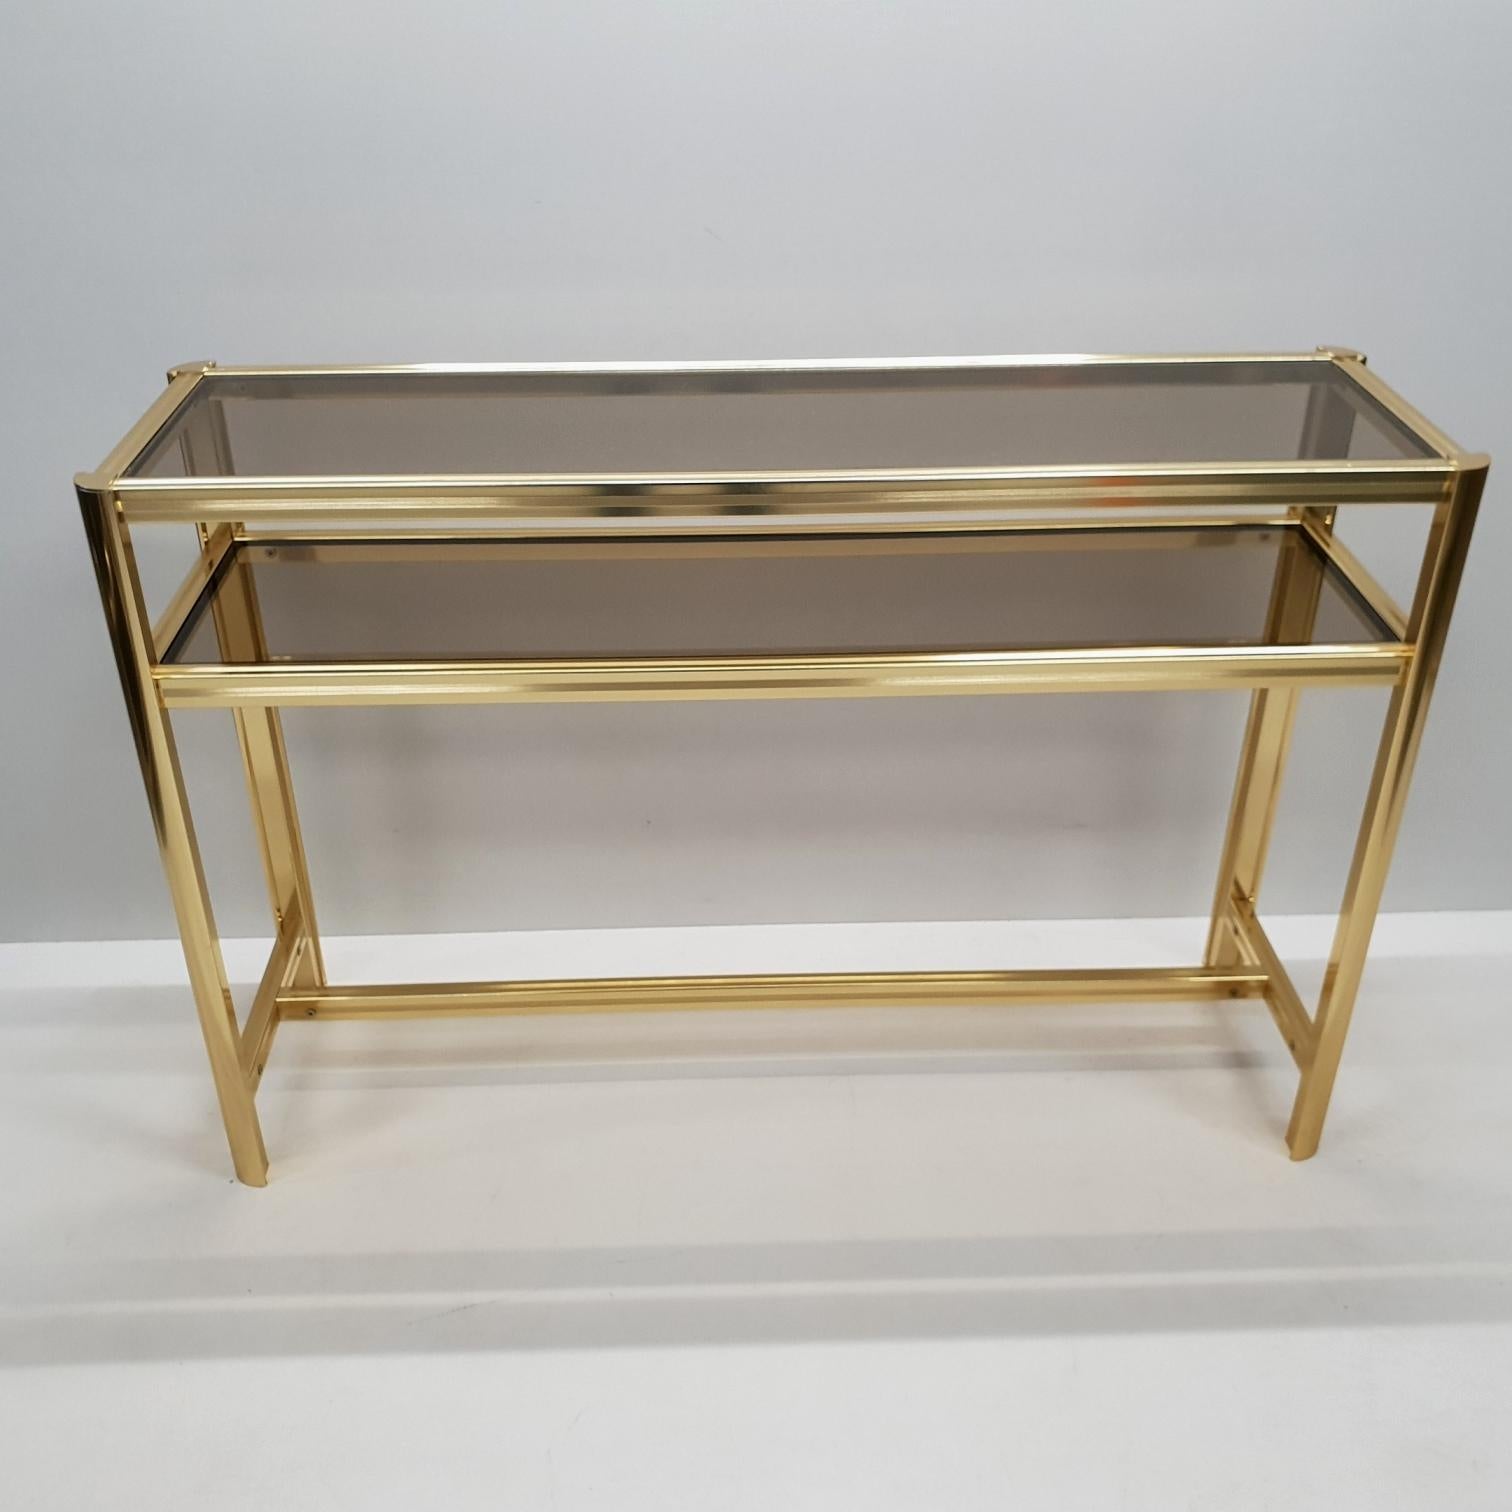 Italian modern gilt brass two tiers side table with smoked glass, 1980s
Excellent vintage condition.